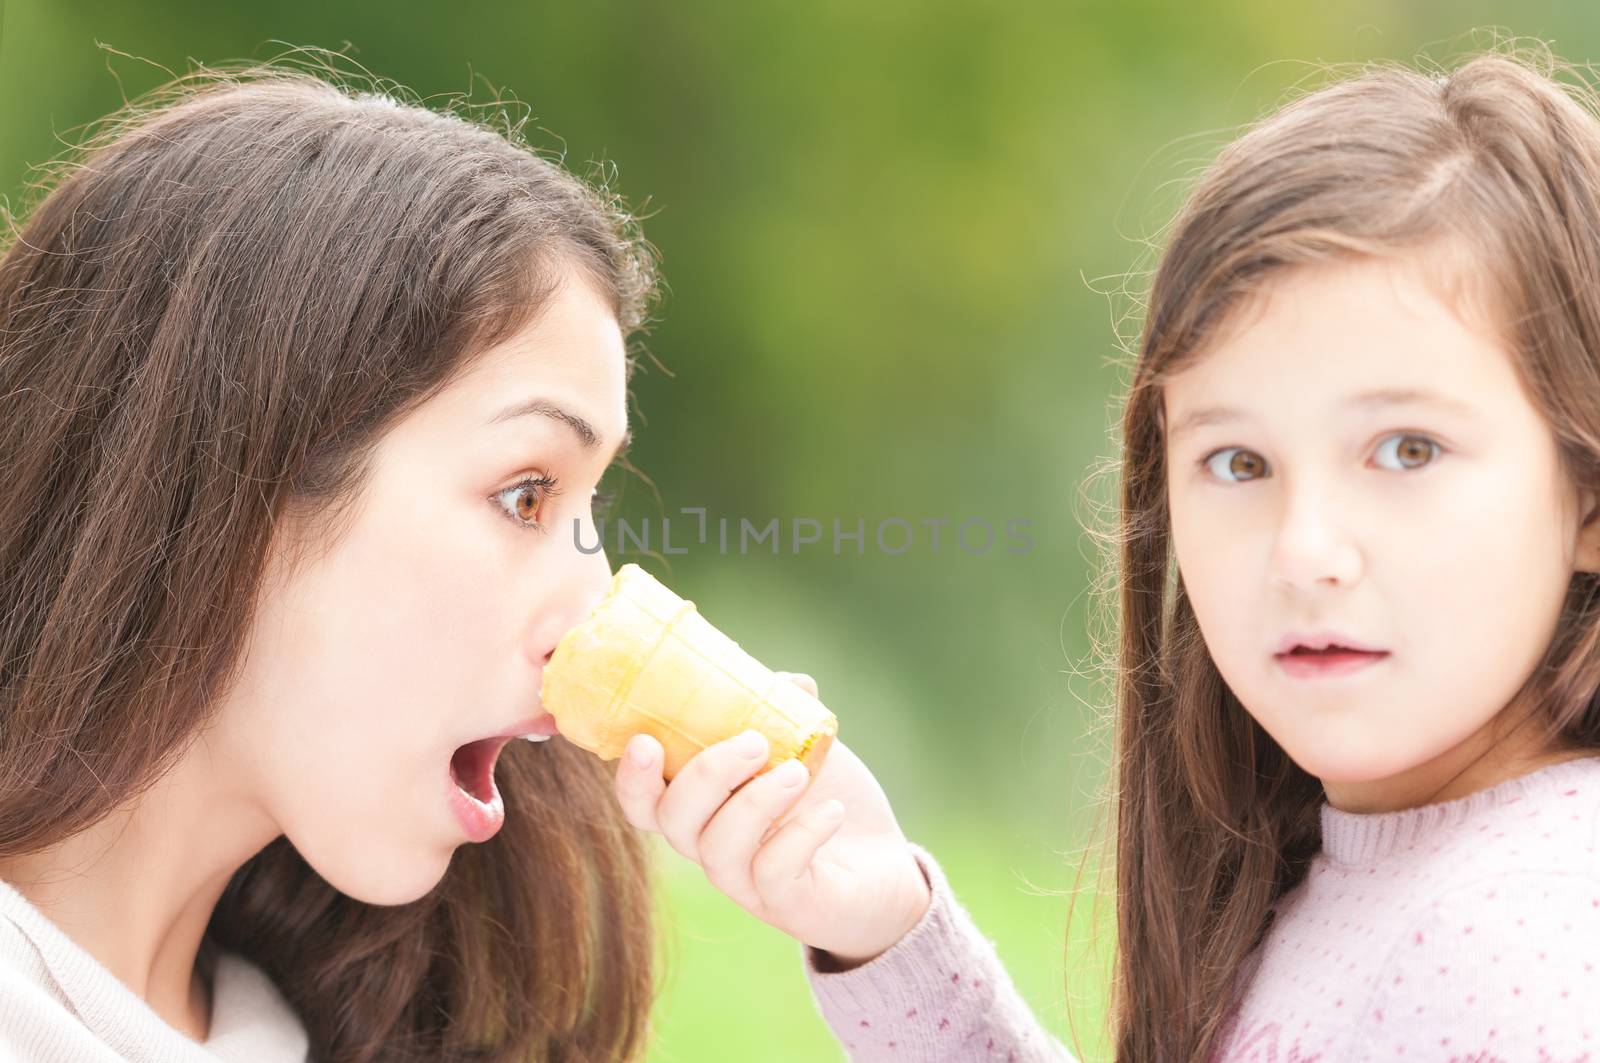 Small daughter pokes ice cream in face of her mother. Surprised facial expression of mother. Family outdoor activity in summer. Amazed emotion of woman and child.